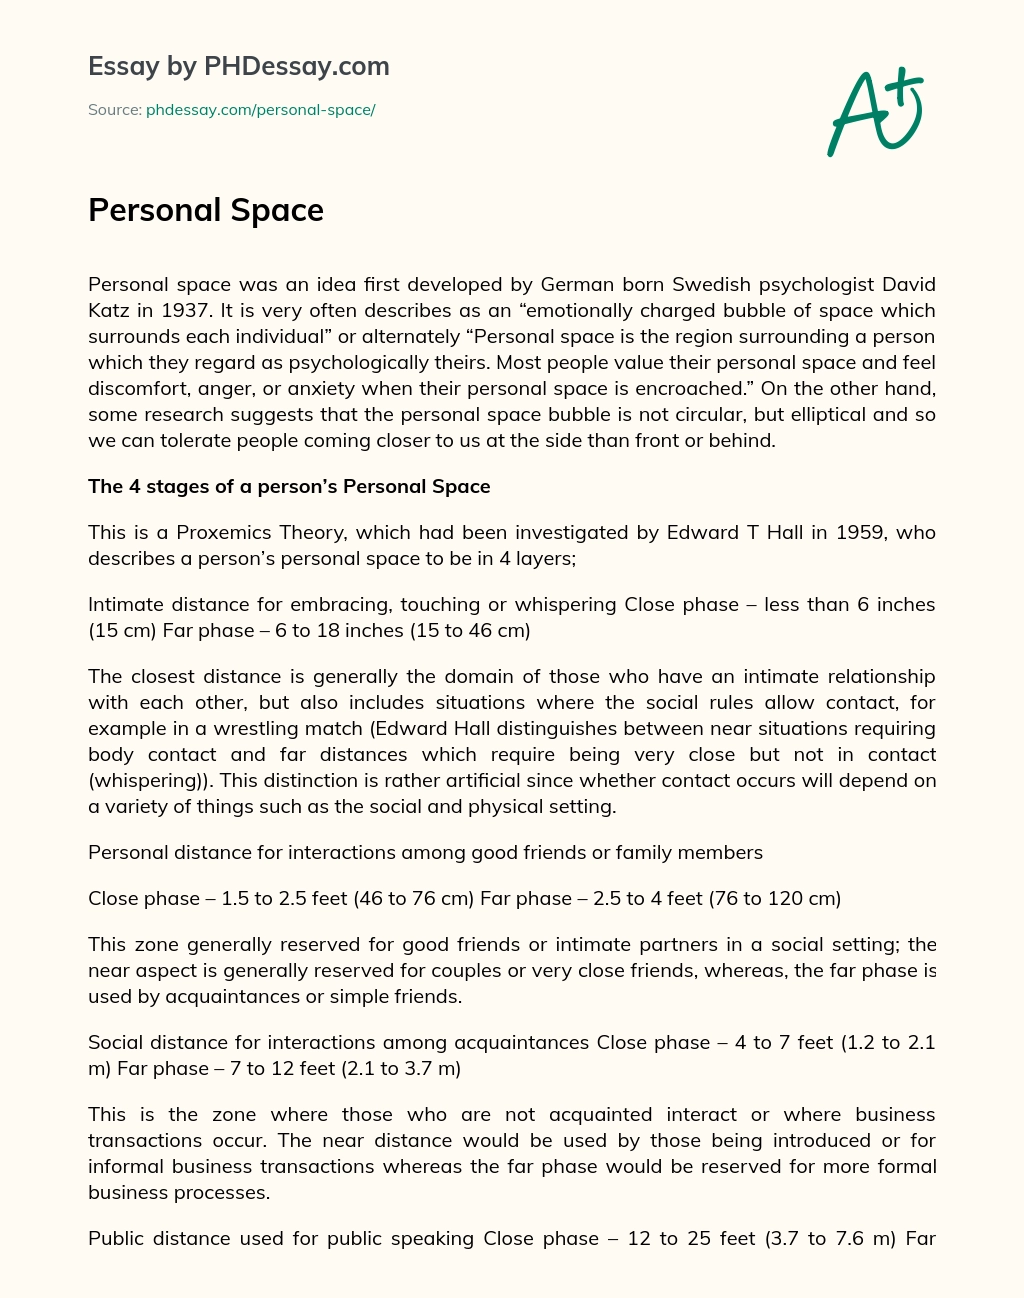 Personal Space essay